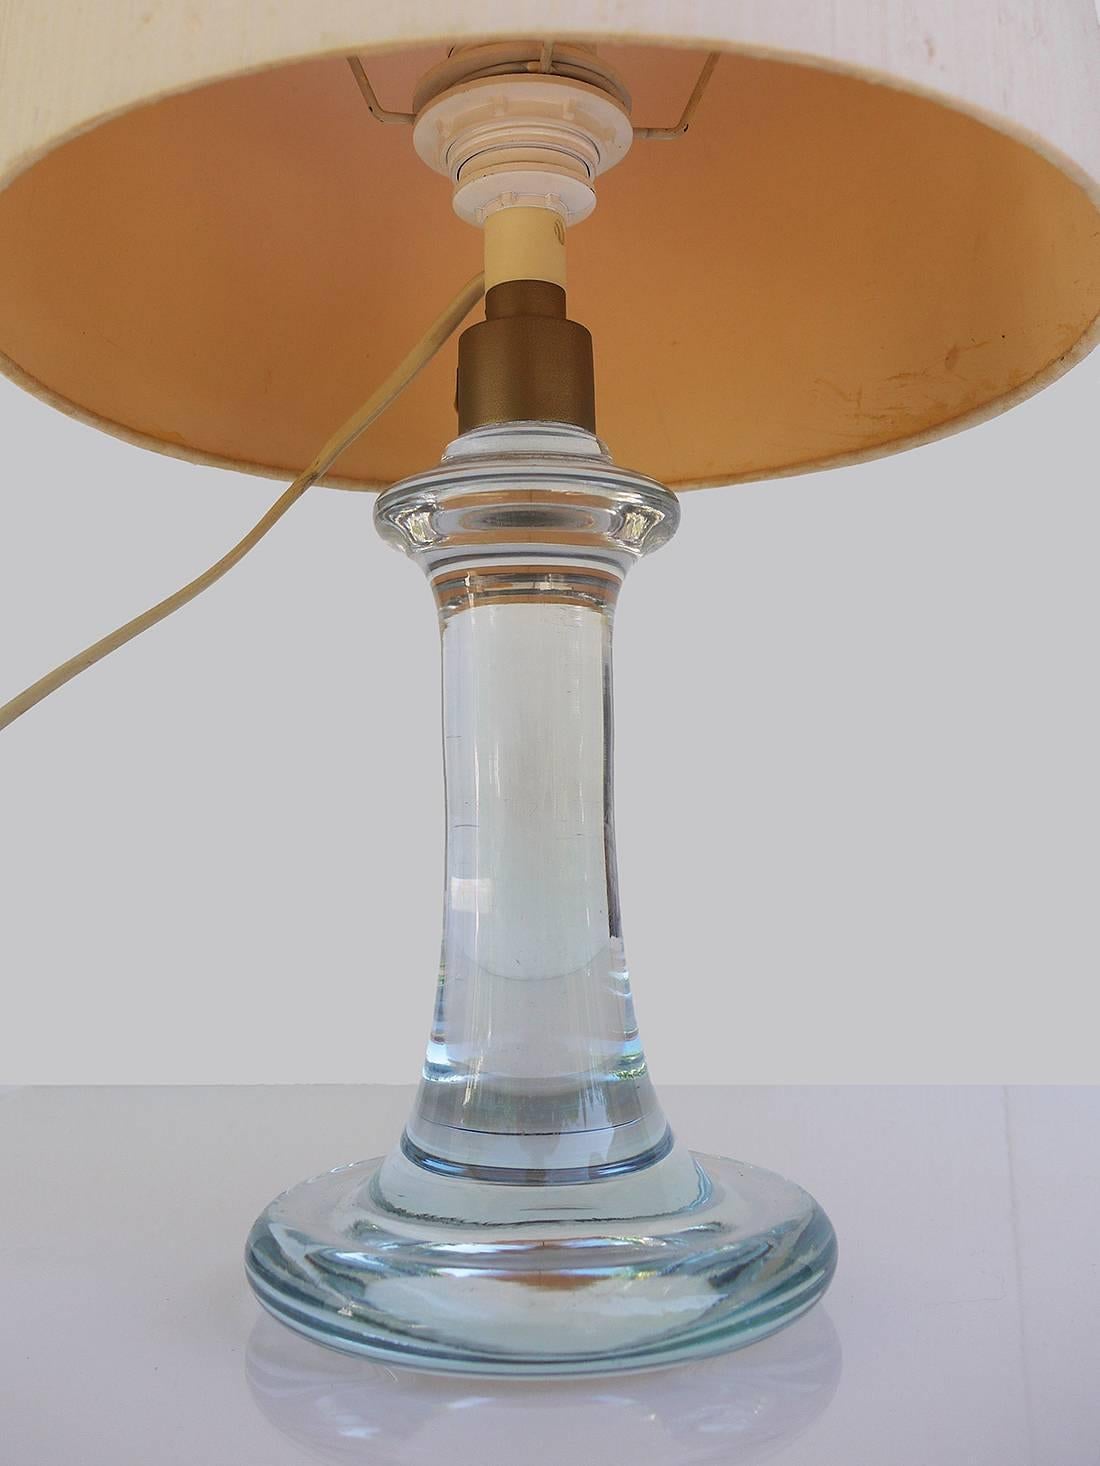 Ingo Maurer table light with a glass foot and the original textile shade, made in Germany in the 1960s.
       